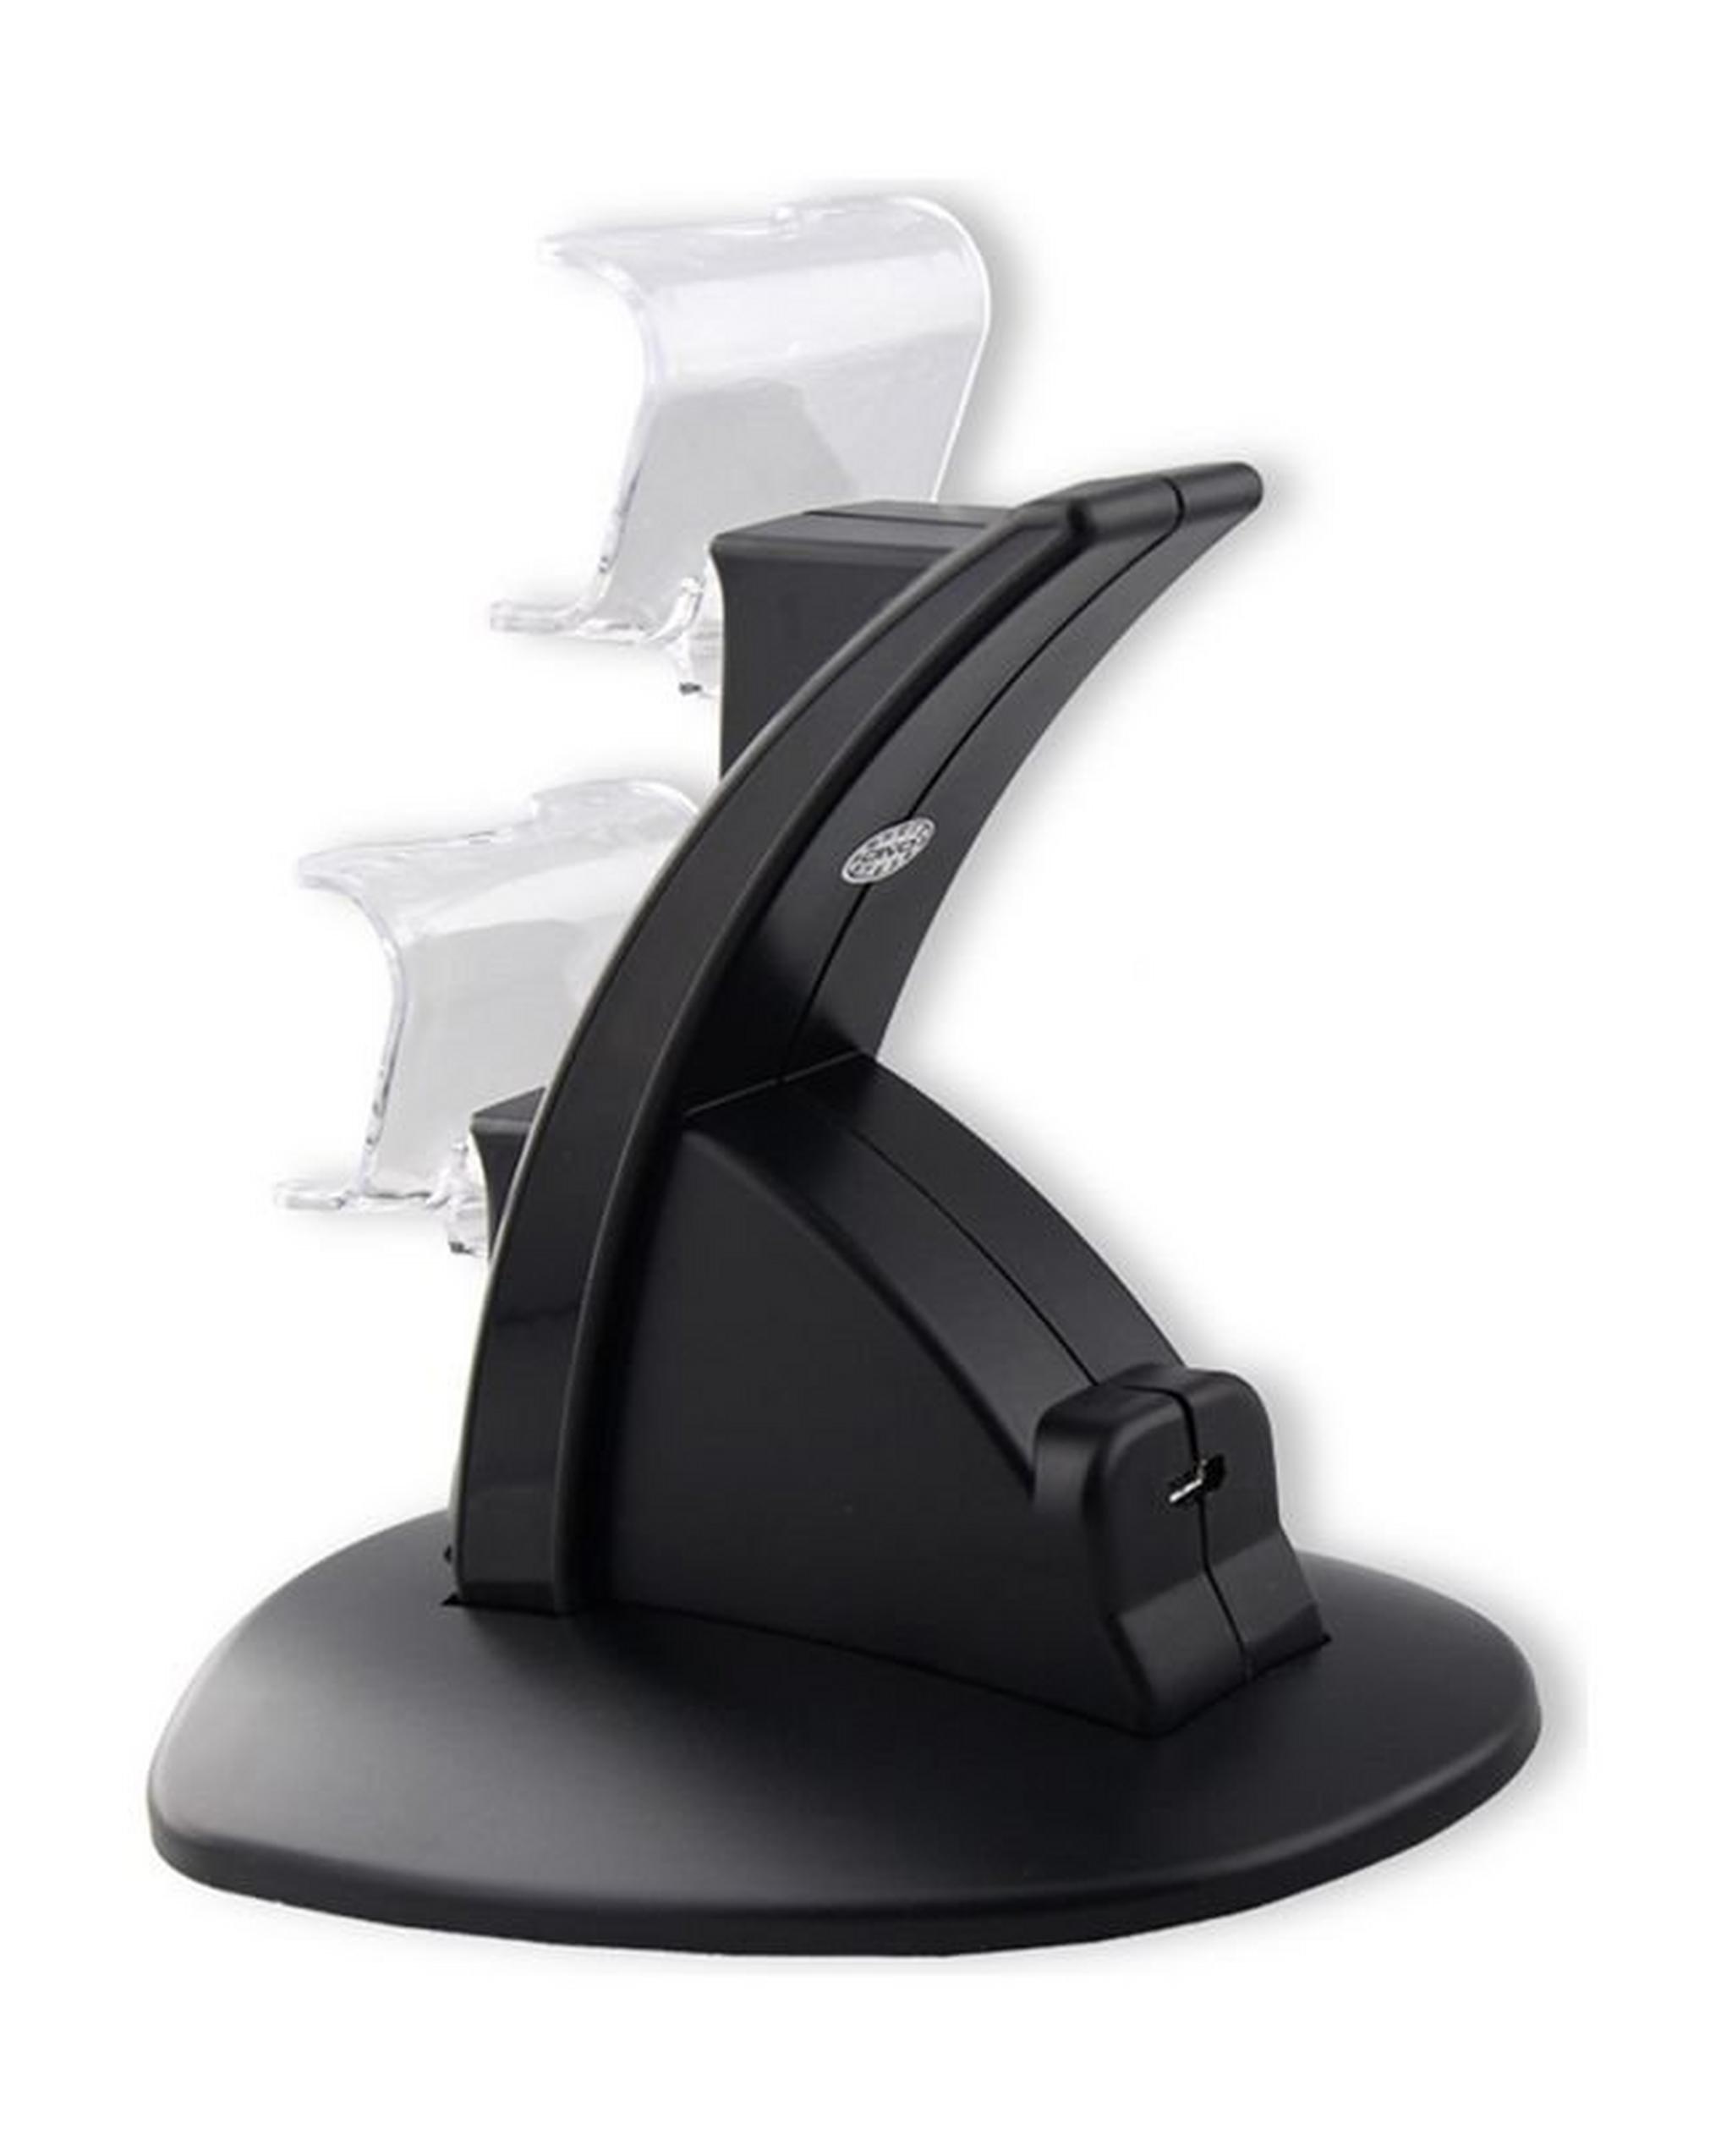 OIVO Dual Fast Charging Stand for PS4 Controller